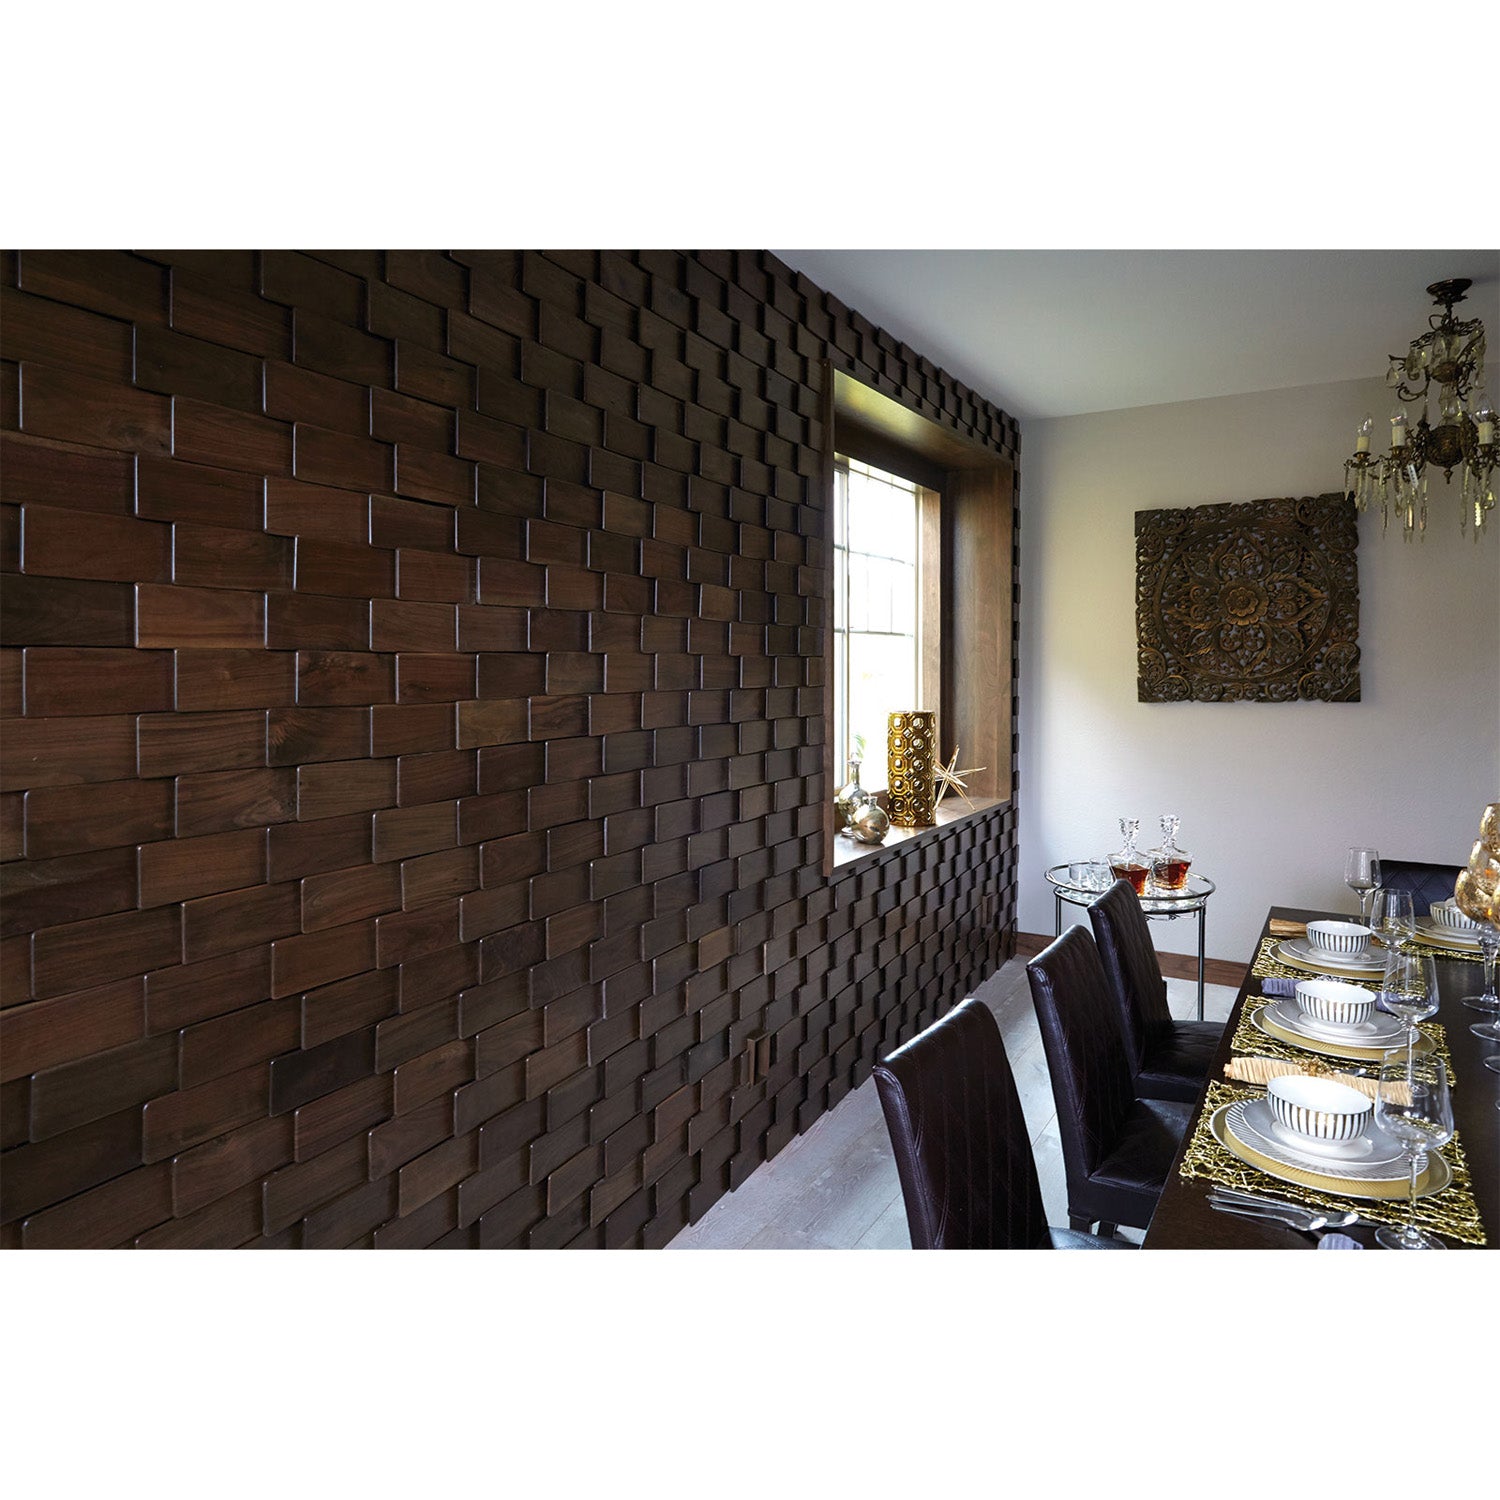 DuChateau - Scale Reckt Wall Coverings - Tabak